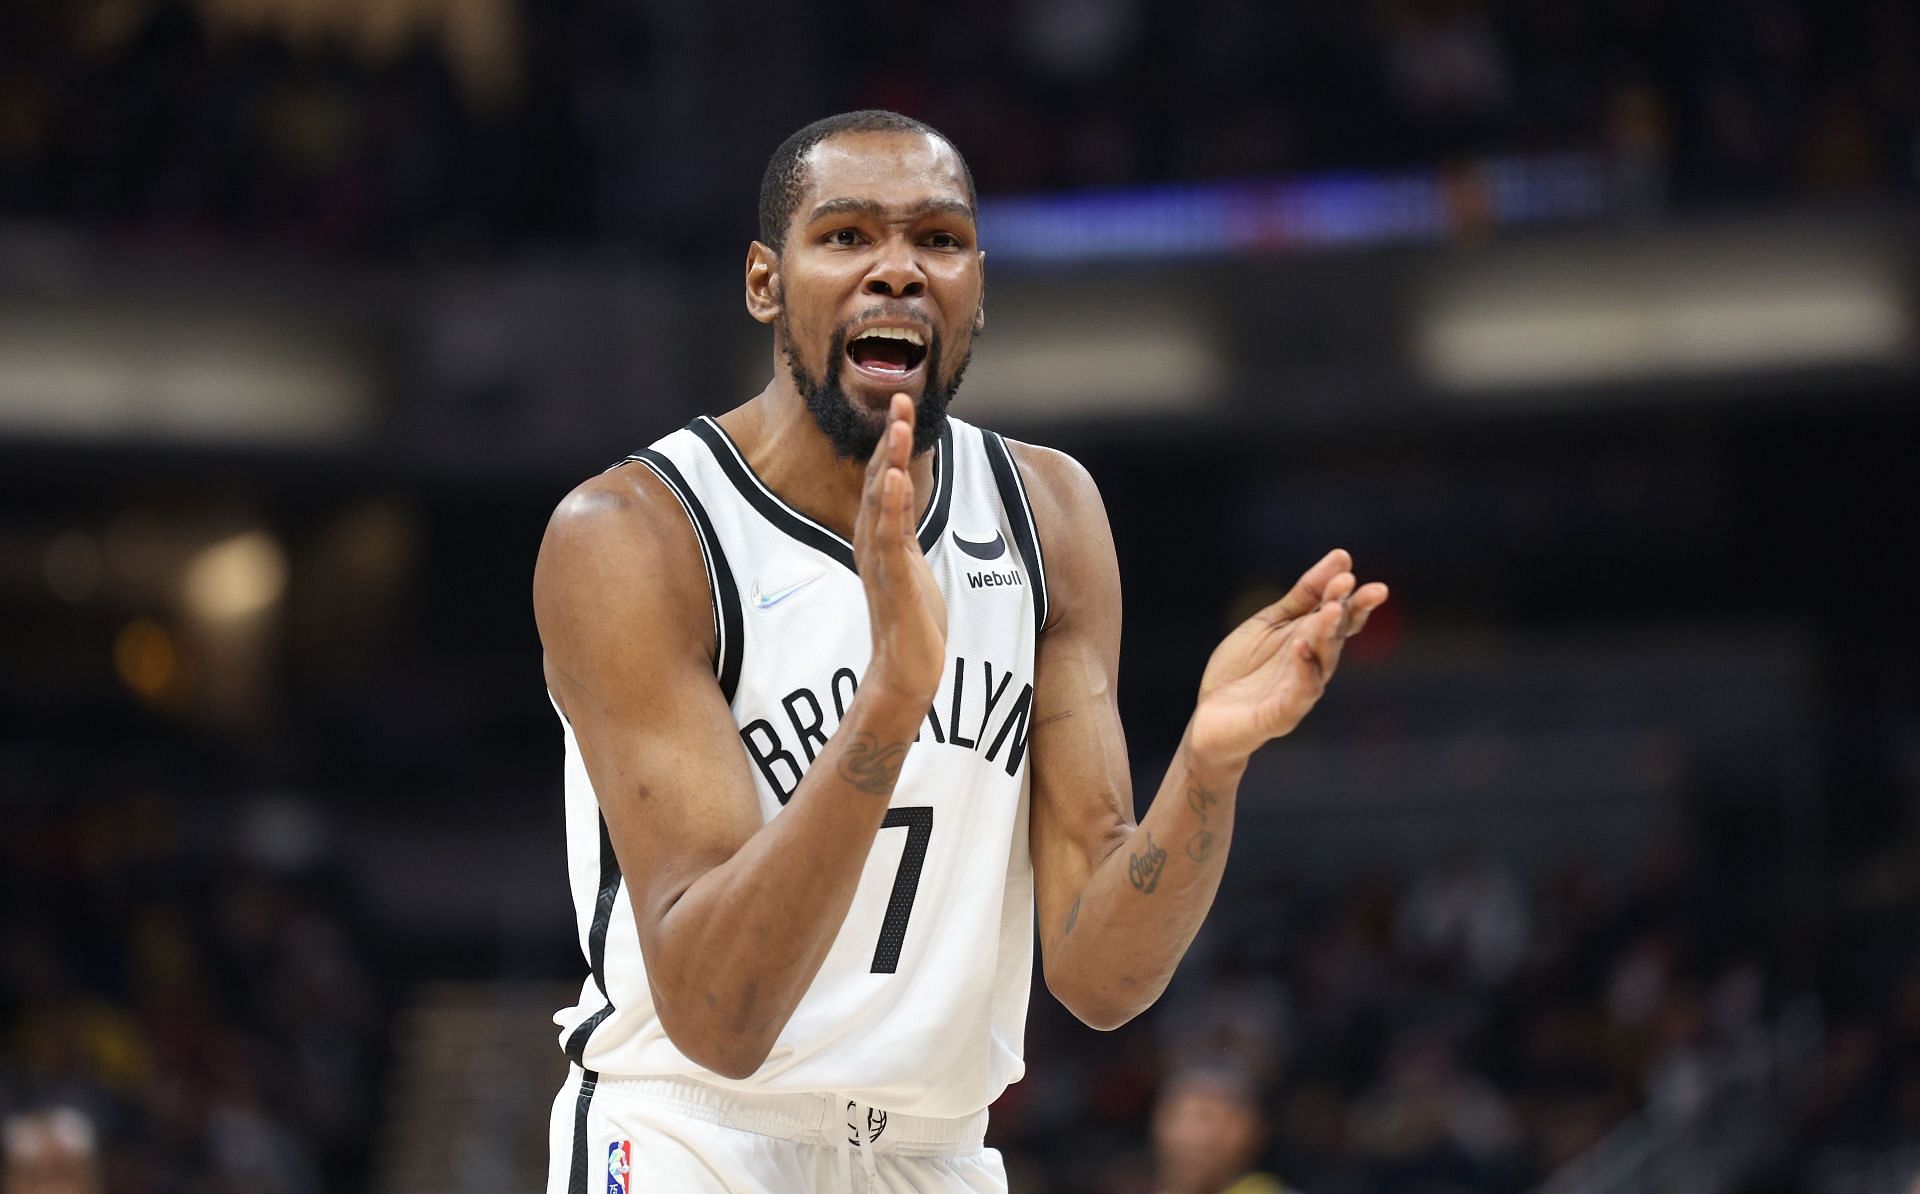 Brooklyn Nets superstar forward Kevin Durant has been impressive this year